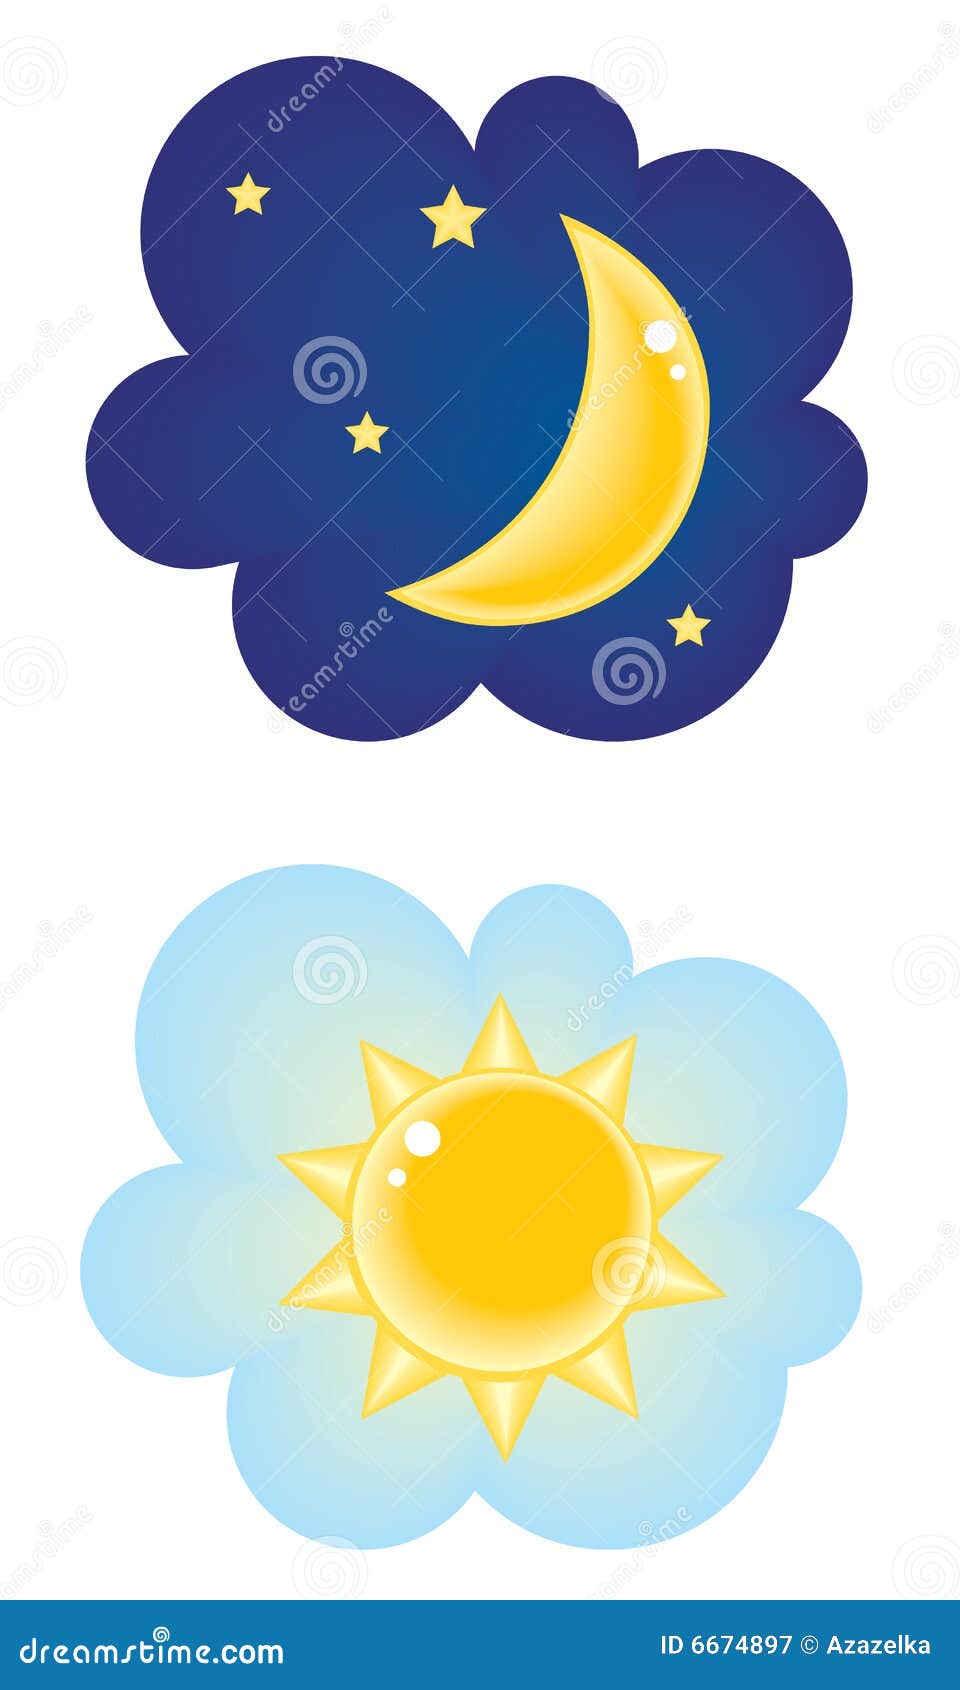 clipart night and day - photo #33